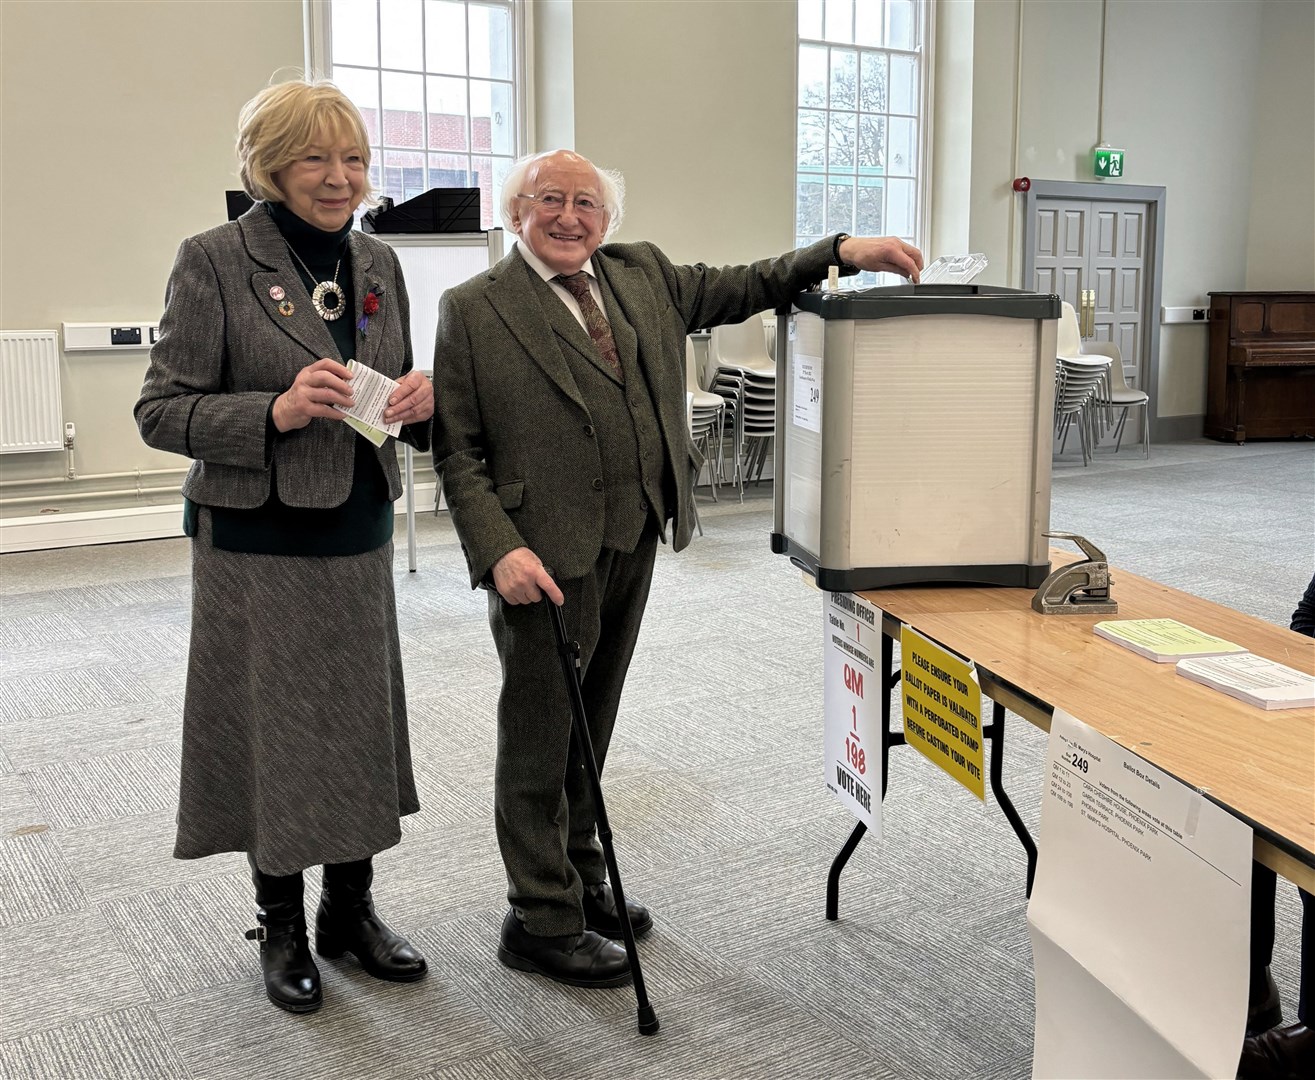 Michael D Higgins and his wife Sabina voting at Phoenix Park (Cate McCurry/PA)